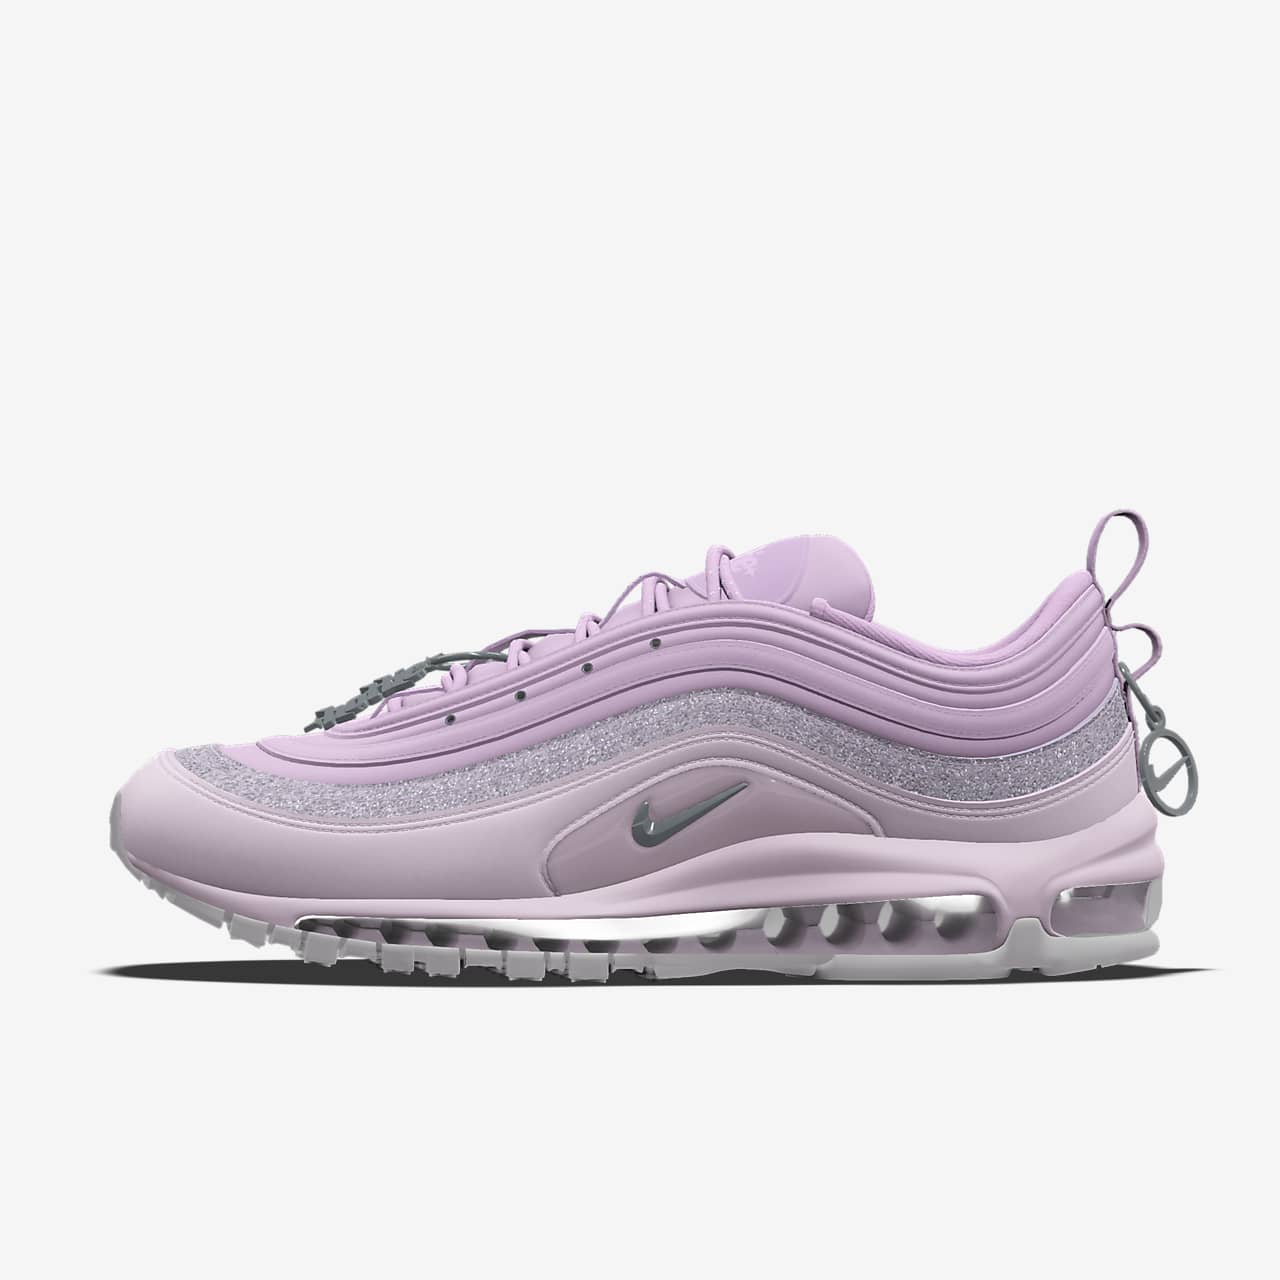 Nike Air Max 97 "Something For Thee Hotties" By You 专属定制运动鞋